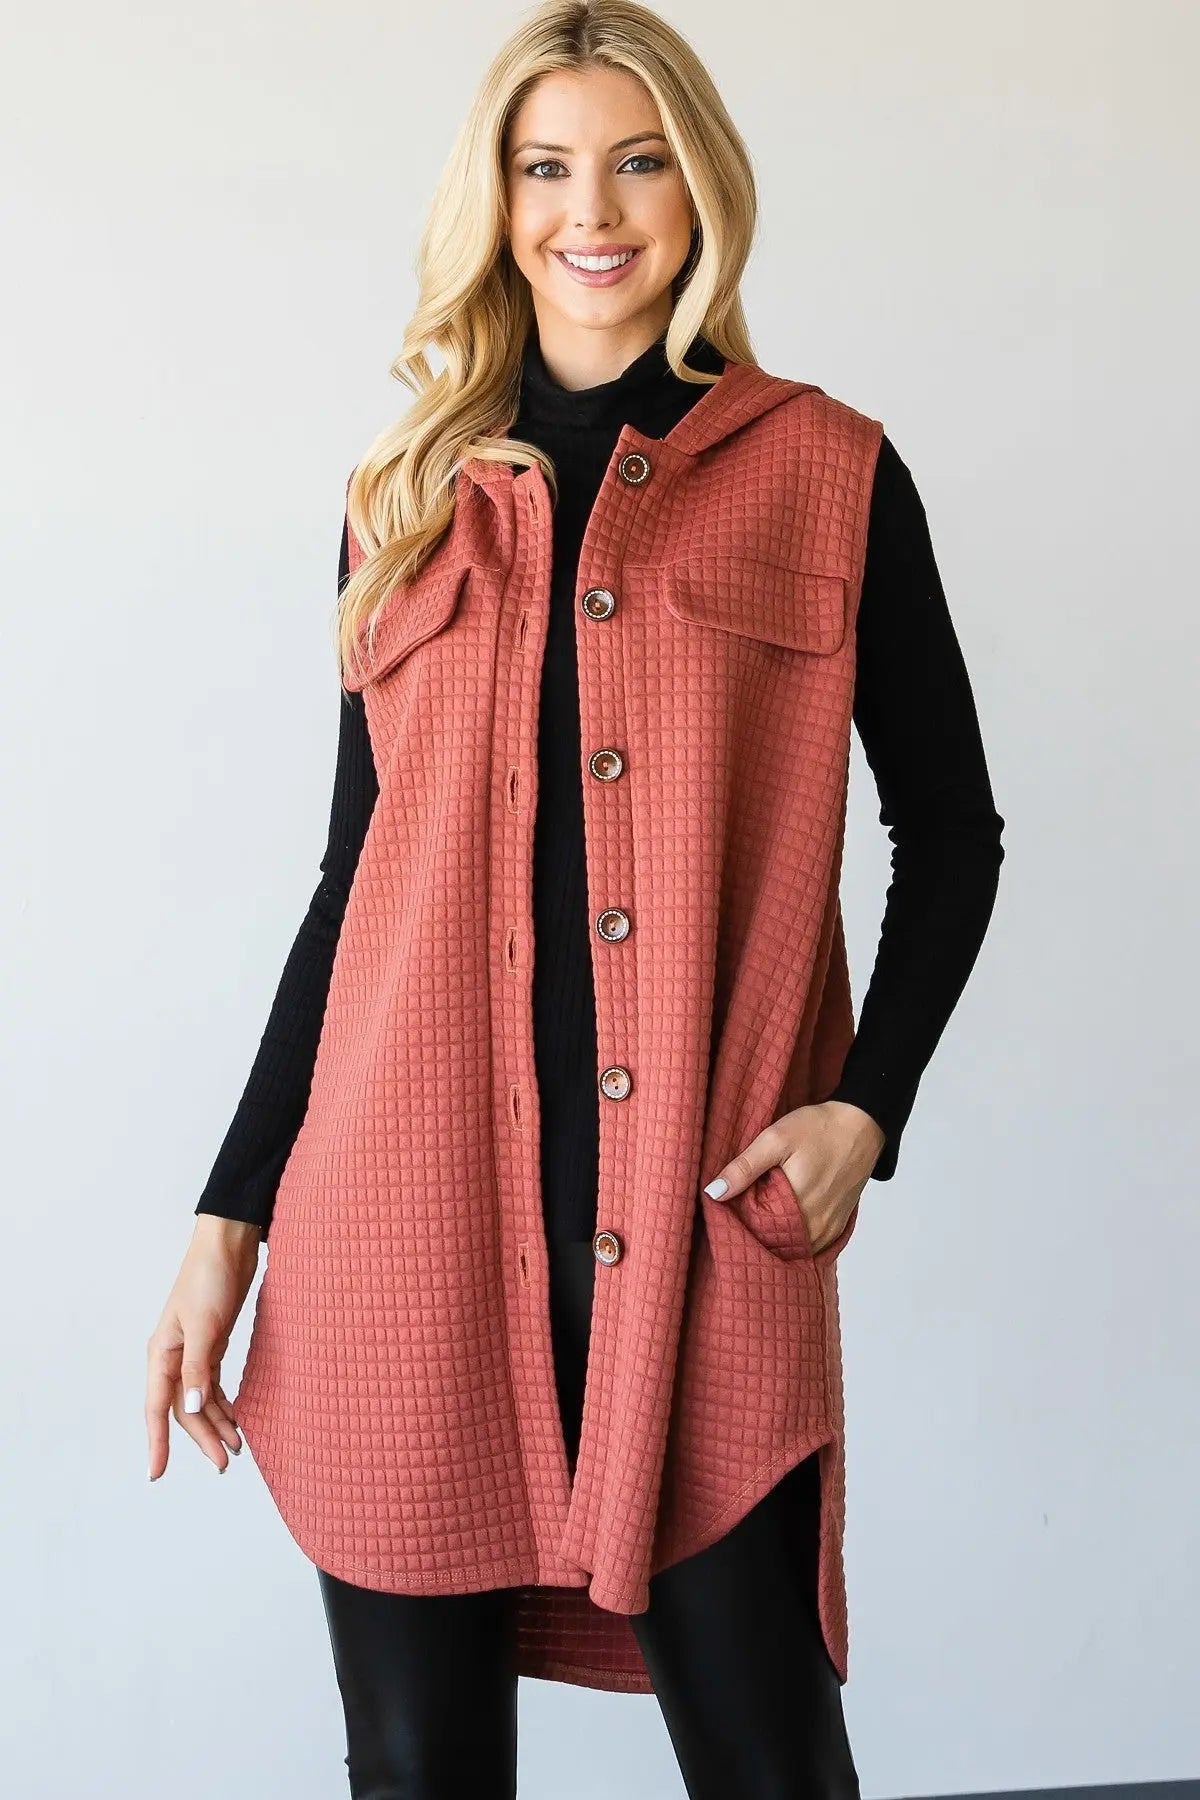 Vest-inspired Jacket With A Collared Neckline Sunny EvE Fashion